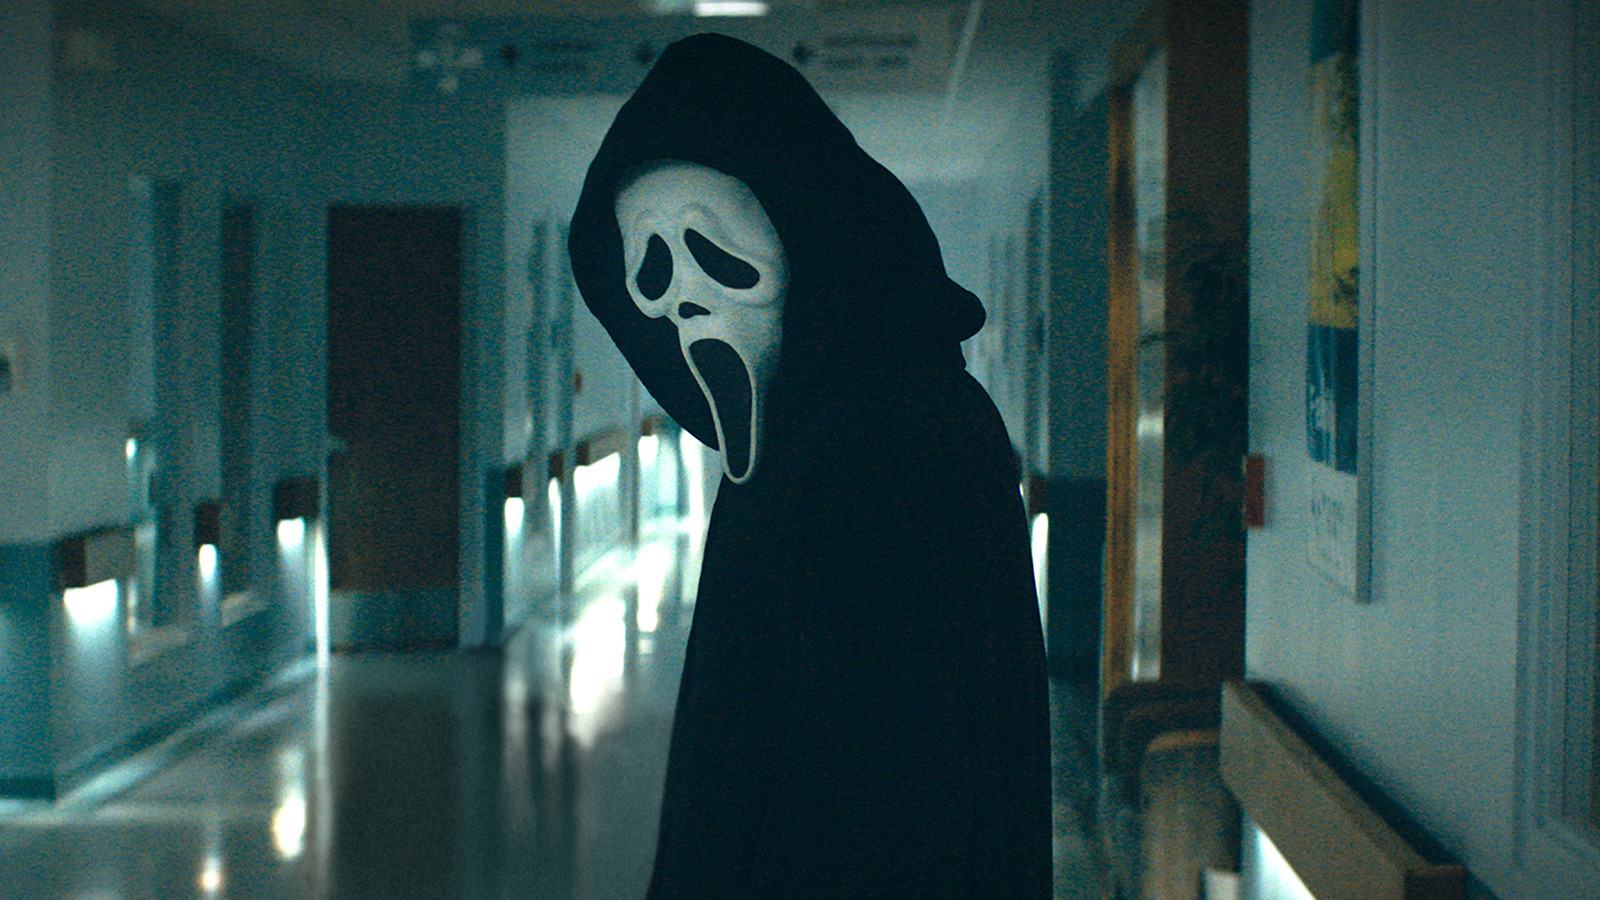 Scream 6 Cast Didn't Always Know Who the Killer Was, Producer Says